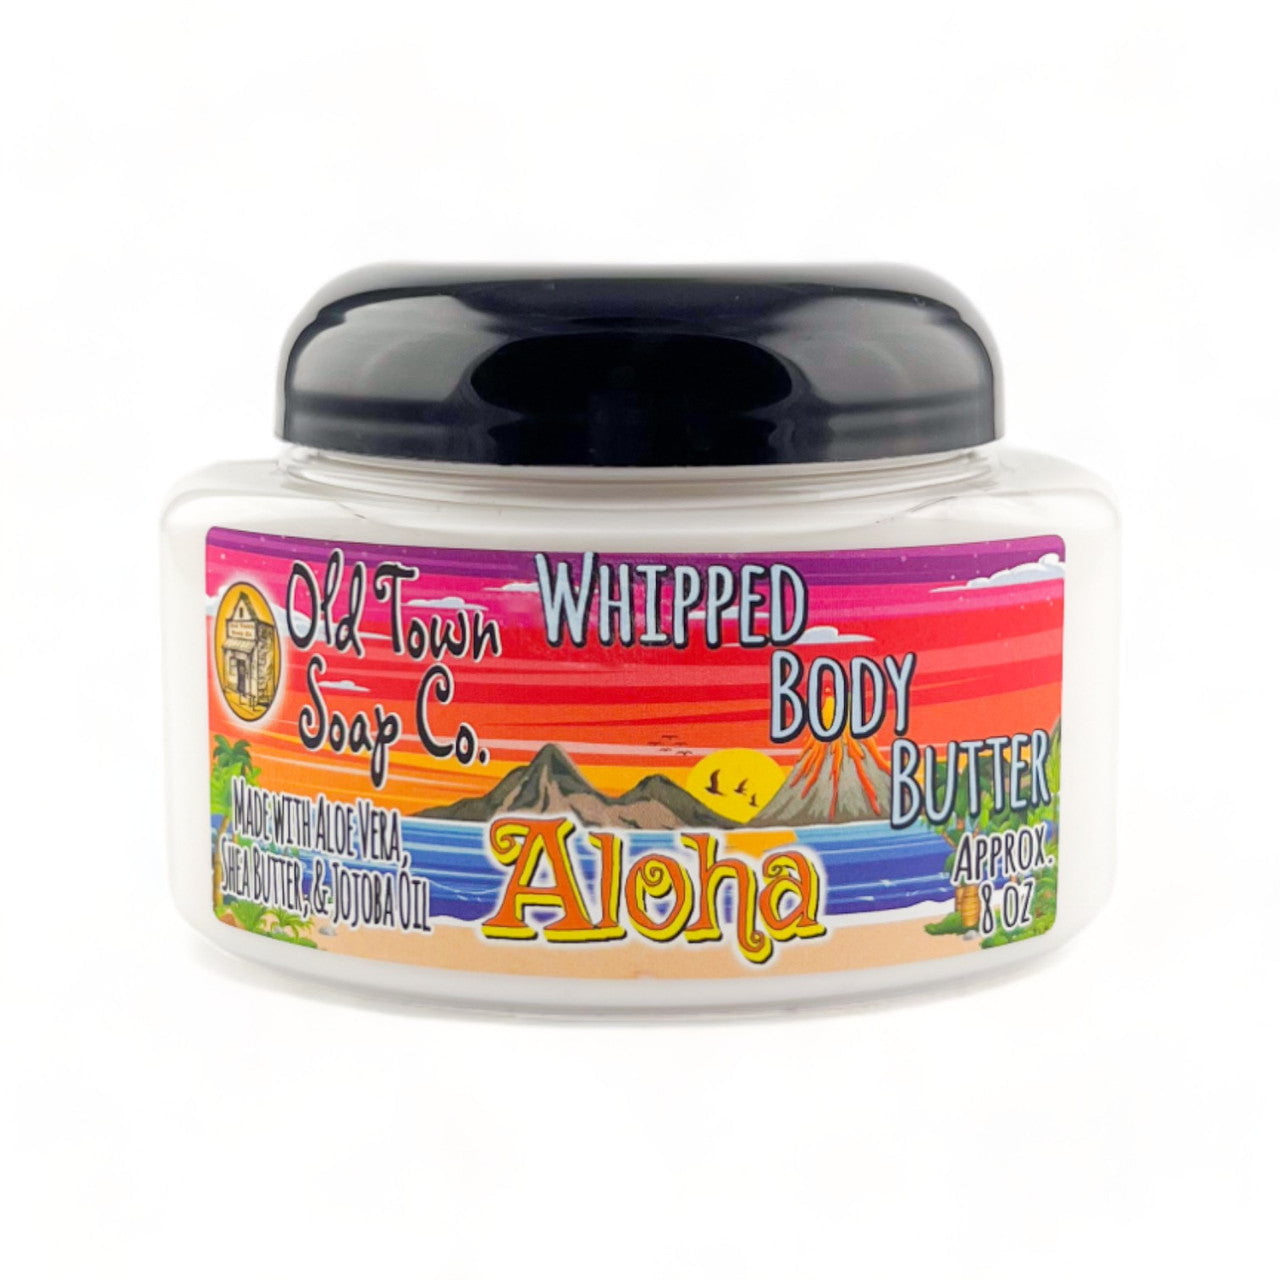 Aloha -Whipped Body Butter - Old Town Soap Co.